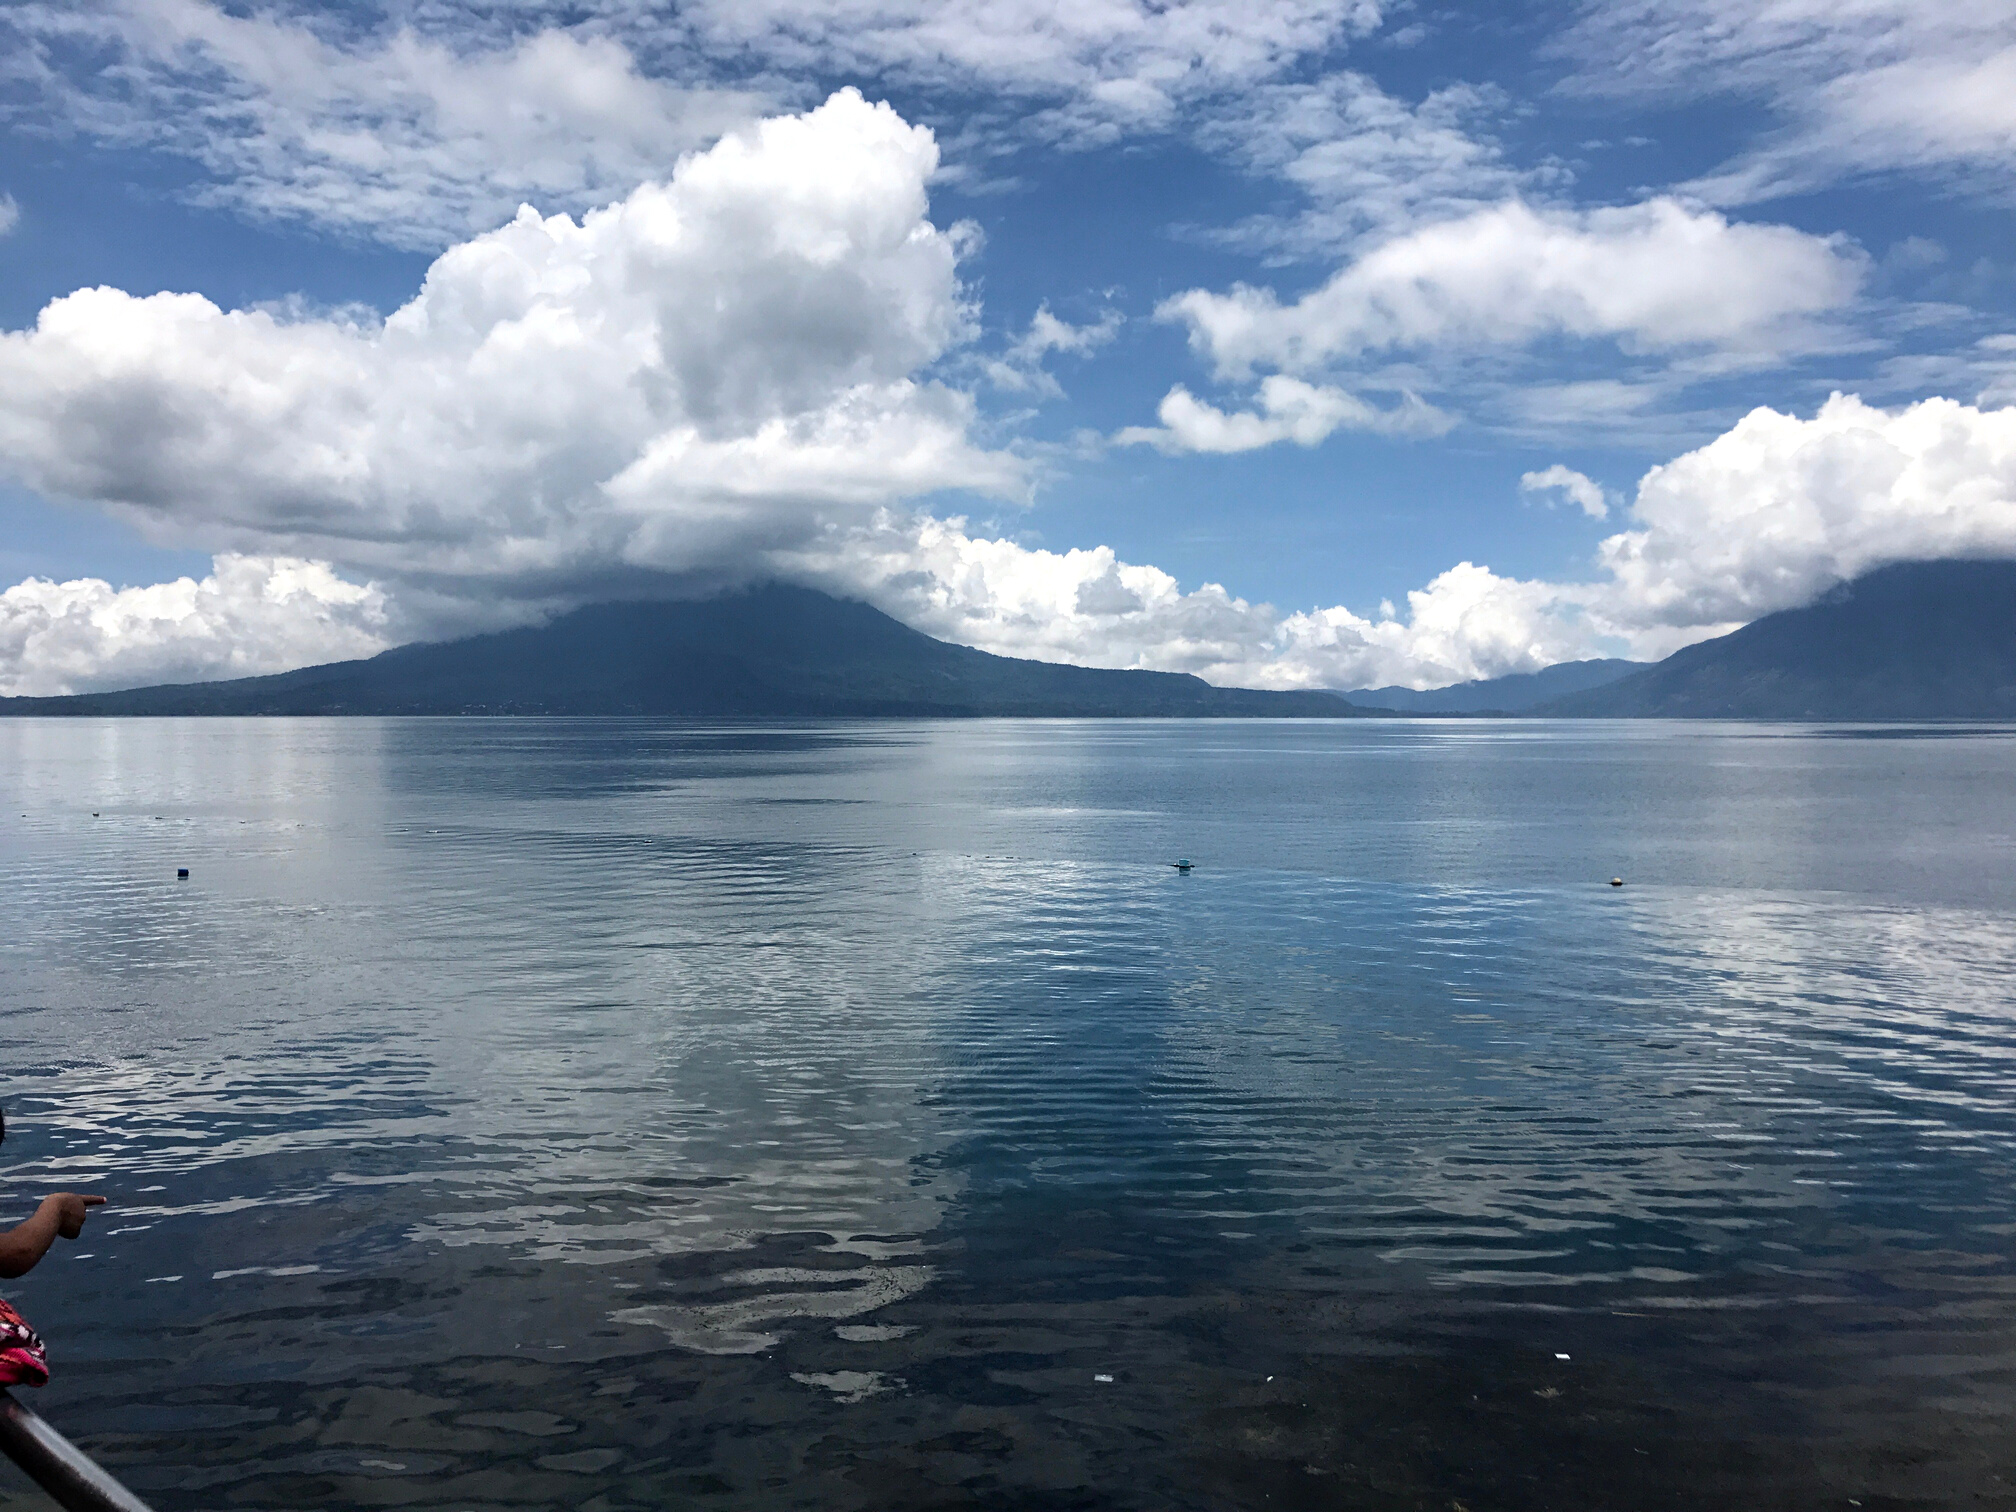 A picture of the waters of beautiful Lake Atitlán reflecting the puffy, white clouds above. Volcán Toliman is in the background as well as Volcán San Pedro.